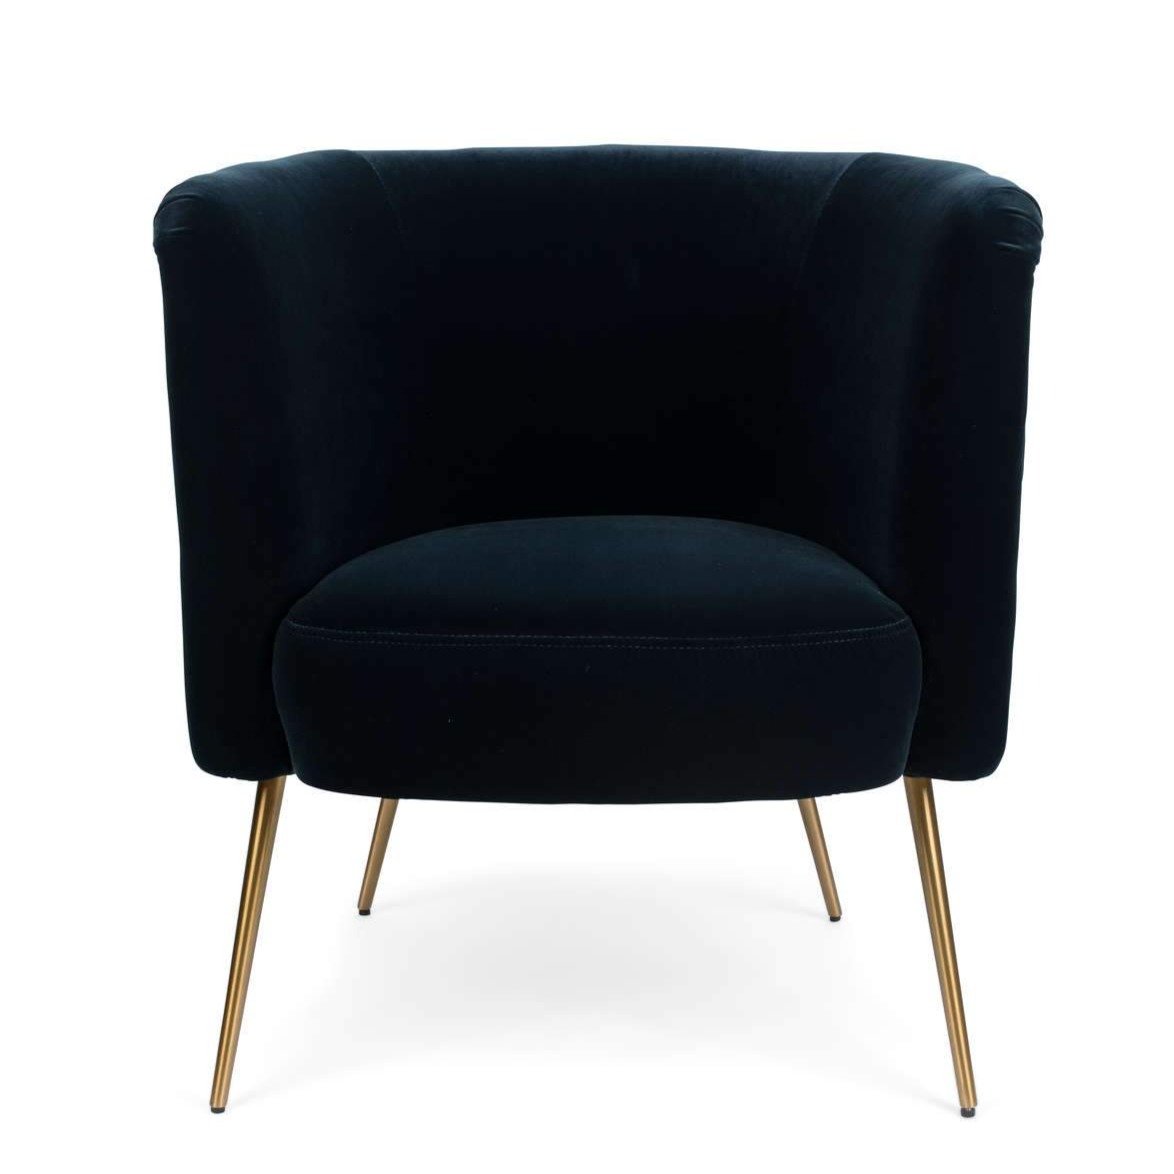 The Bold Monkey Such and Stud armchair is made of luxurious, velvet upholstery and matte, brass legs. The retro style with buttons is contrasted with modern rounded lines, which results in a real armchair for any room. But the real MVP of this velvet chair is its golden border with studs.